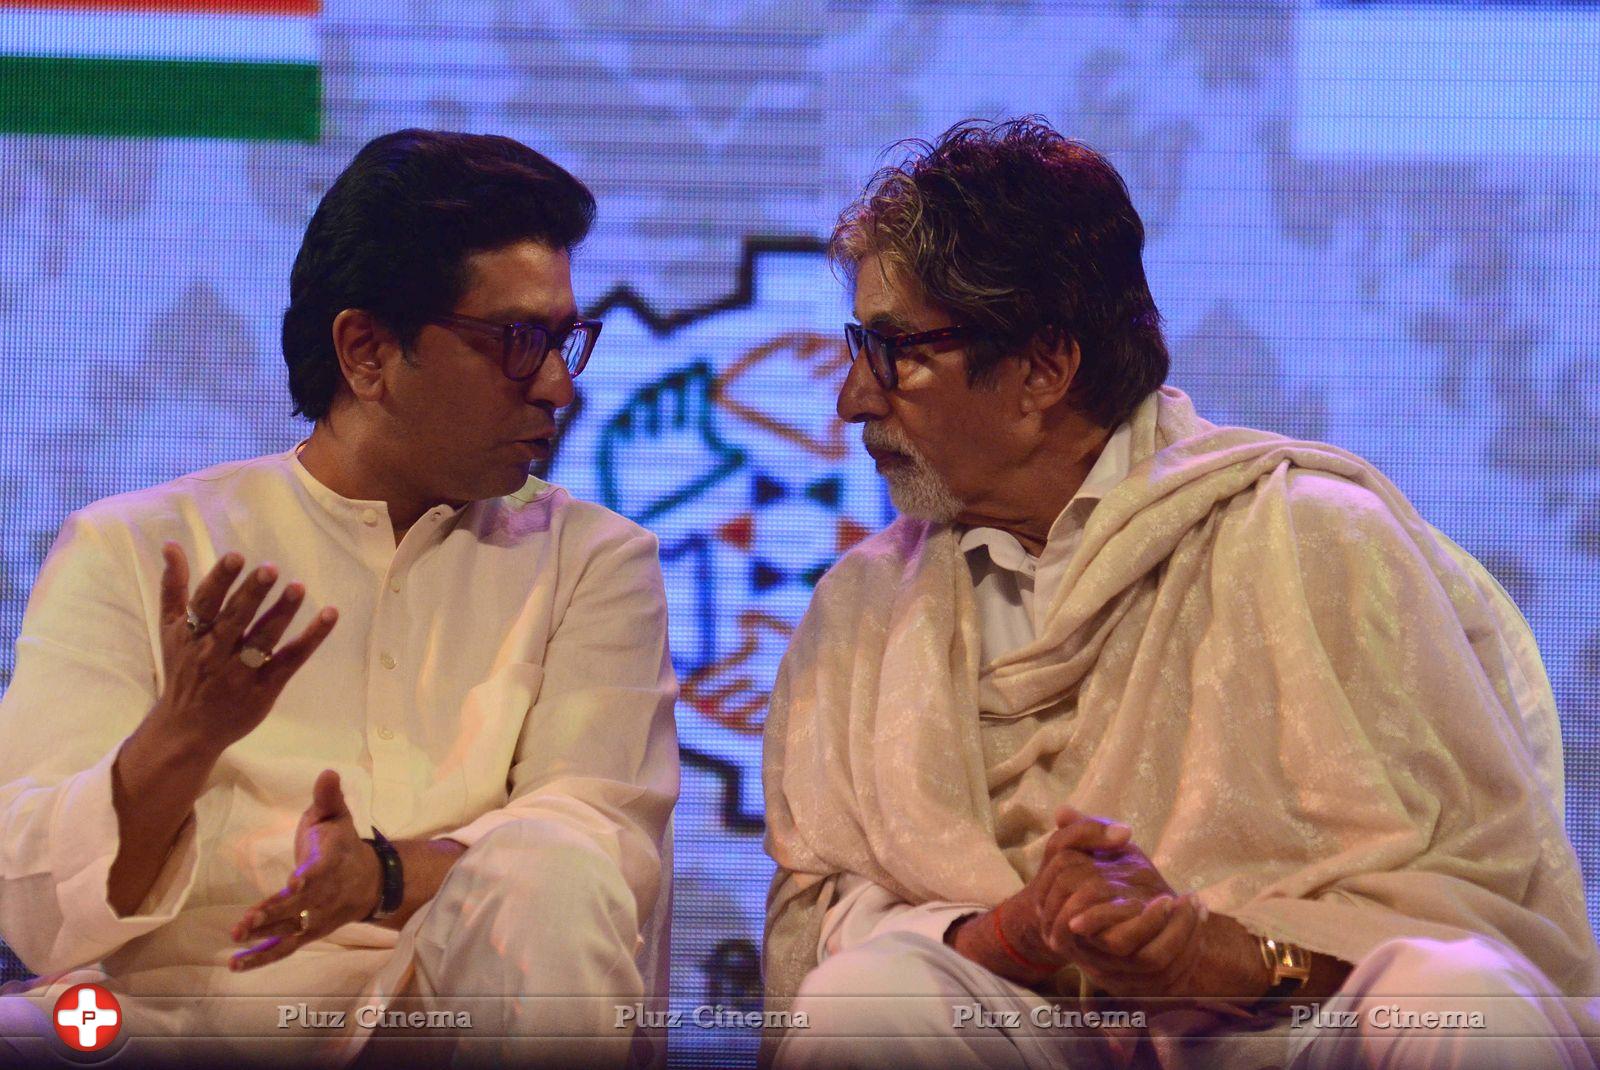 Amitabh Bachchan at MNCS 7th Anniversary Function Photos | Picture 685411